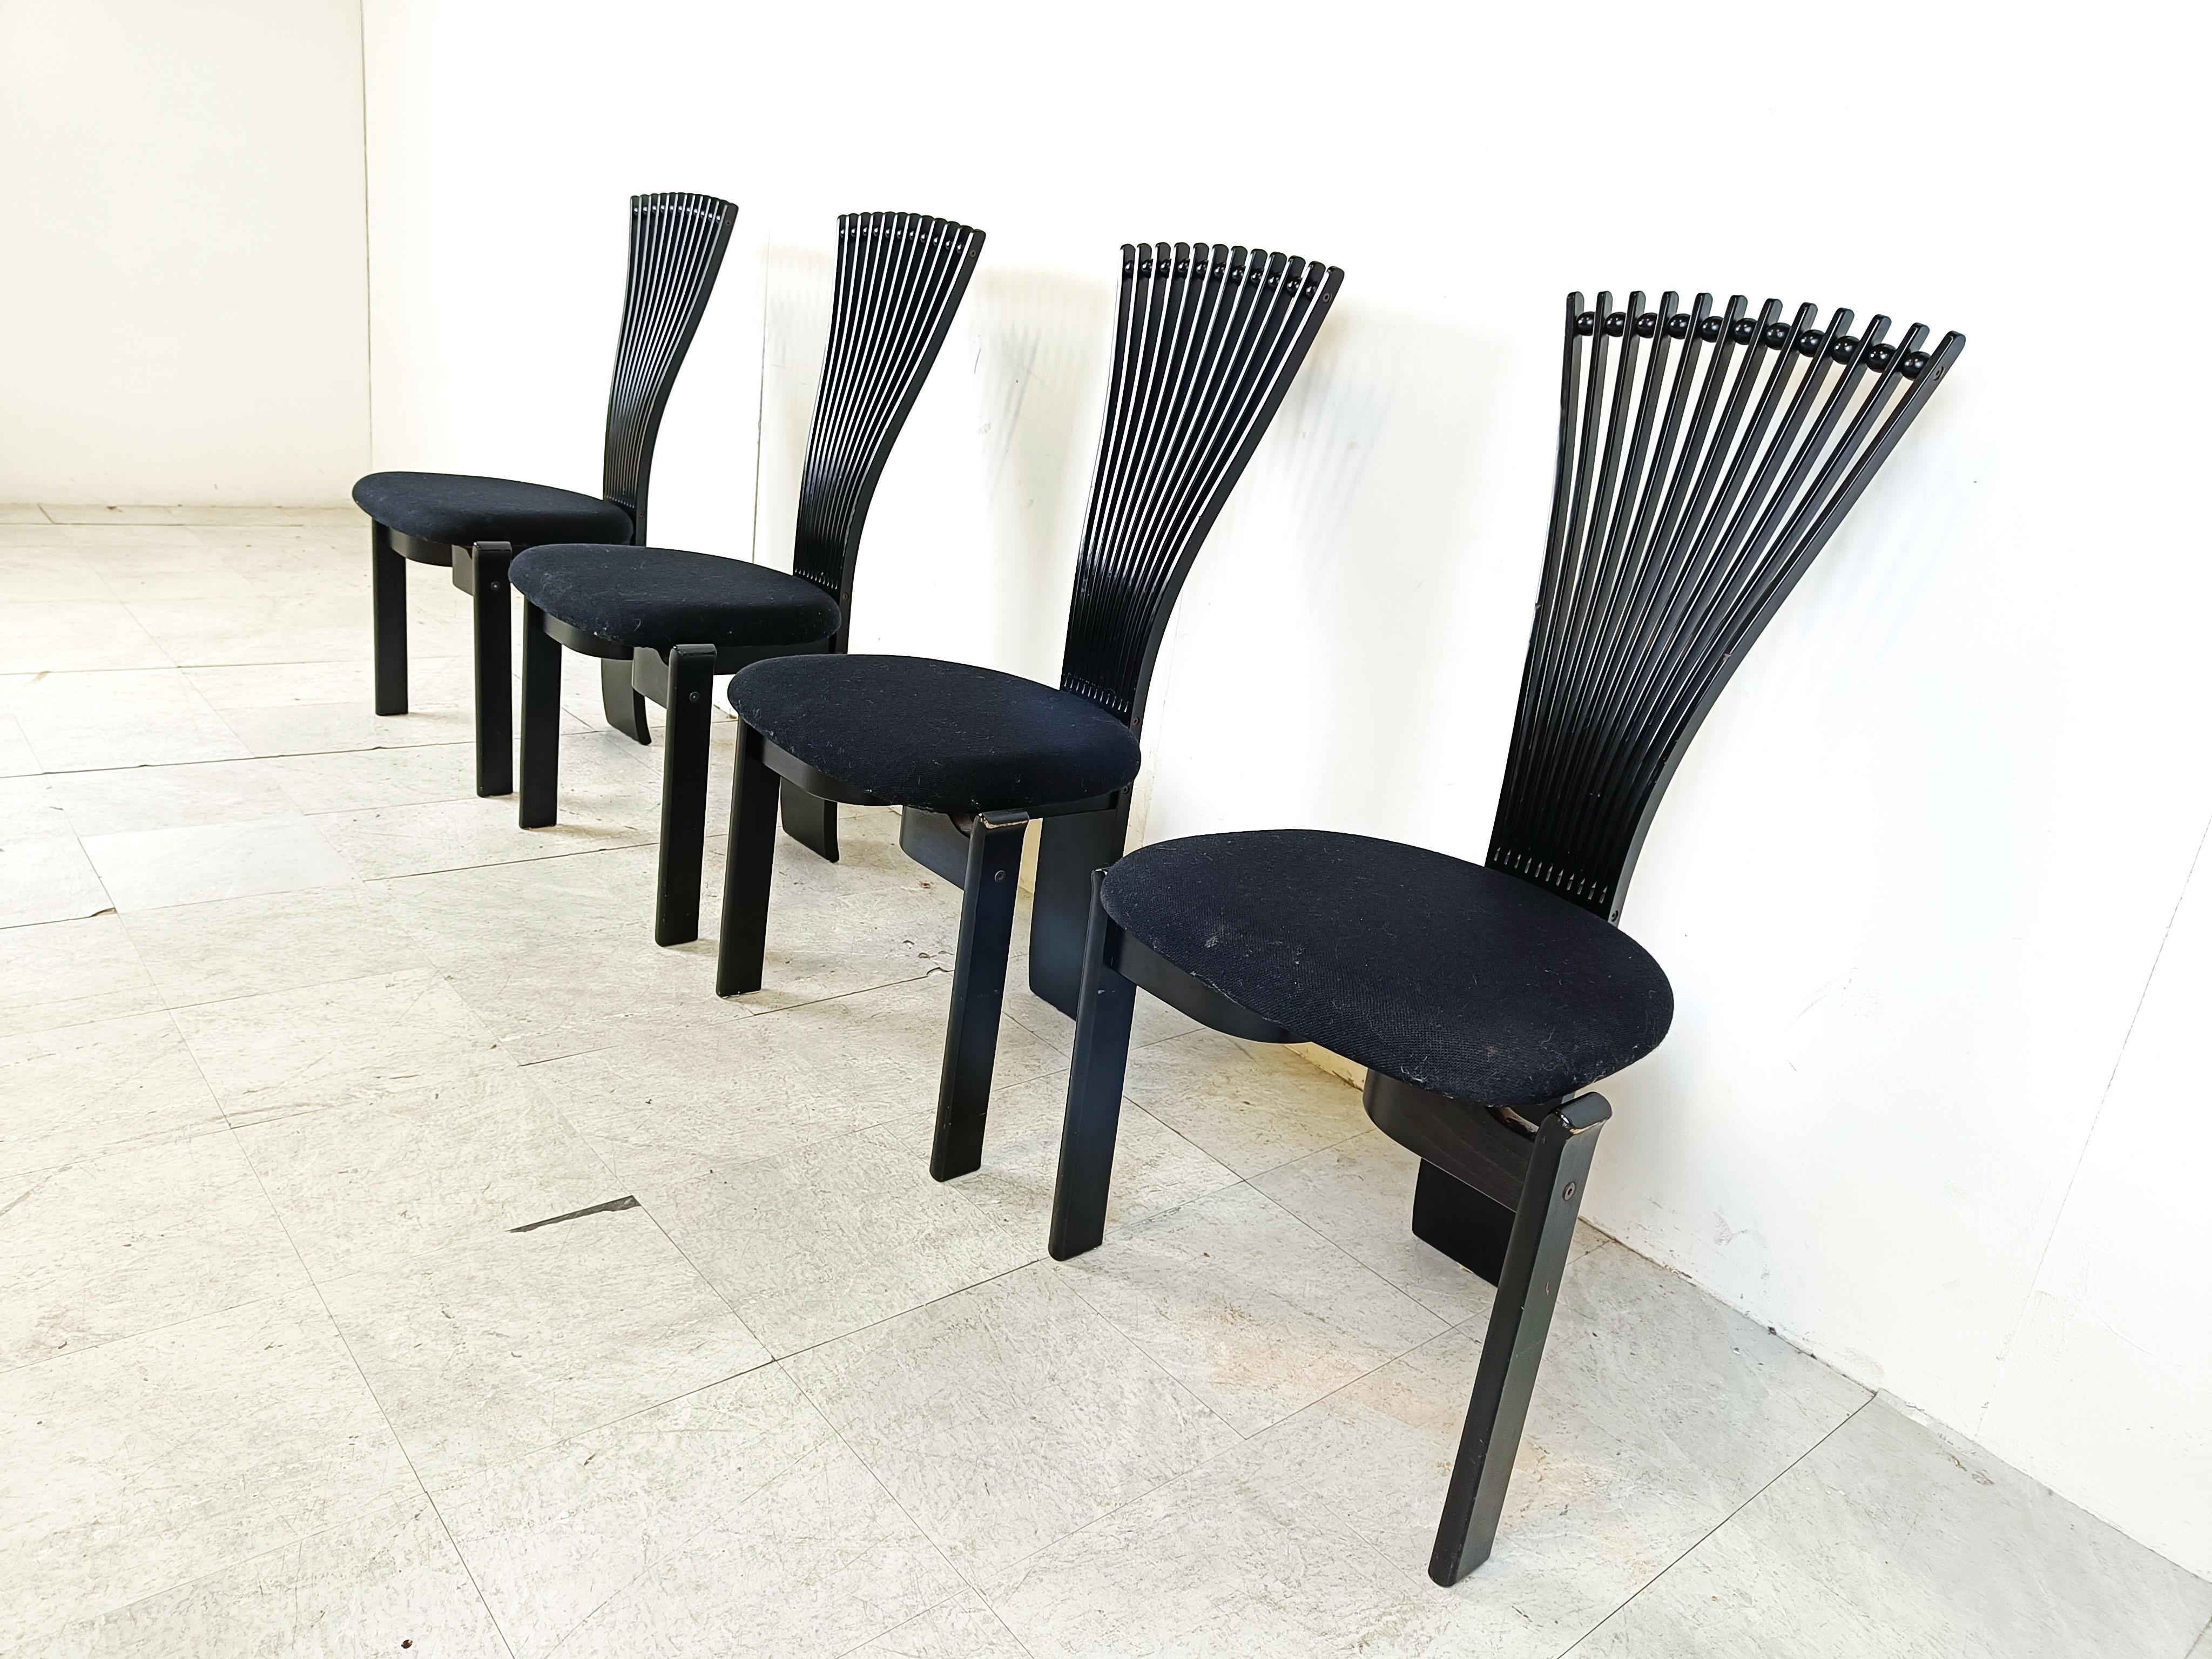 Fabric Totem chairs by Torstein Nislen for Westnofa, 1980s For Sale